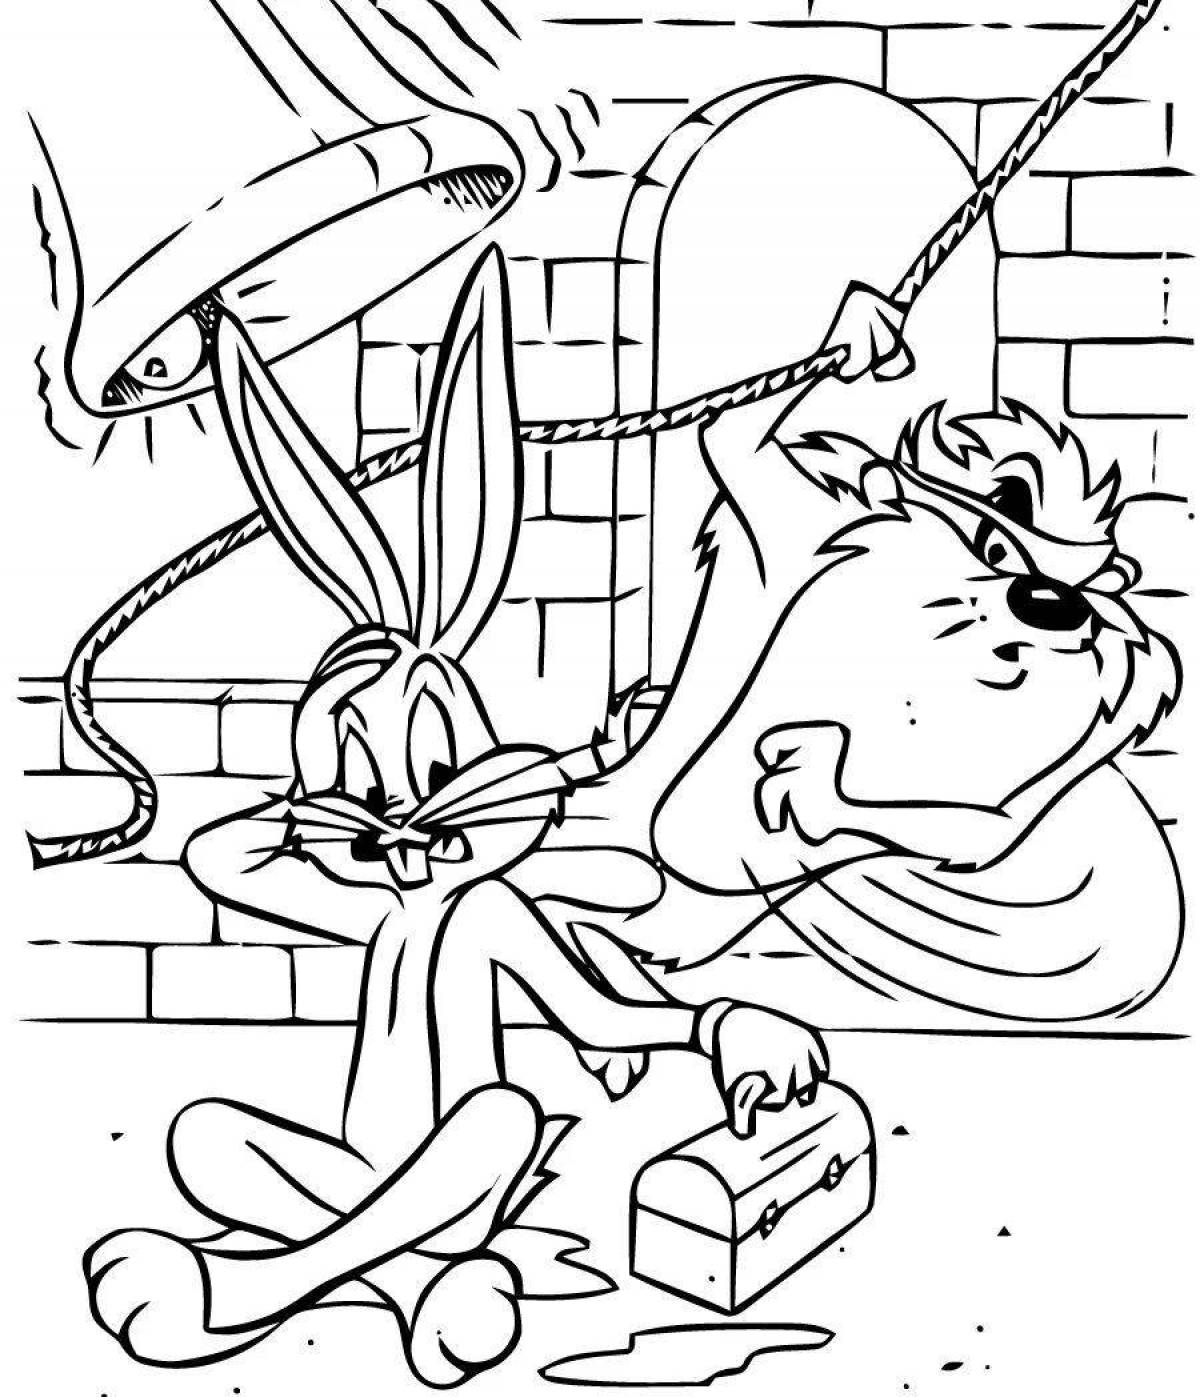 Tiny rabbit coloring page